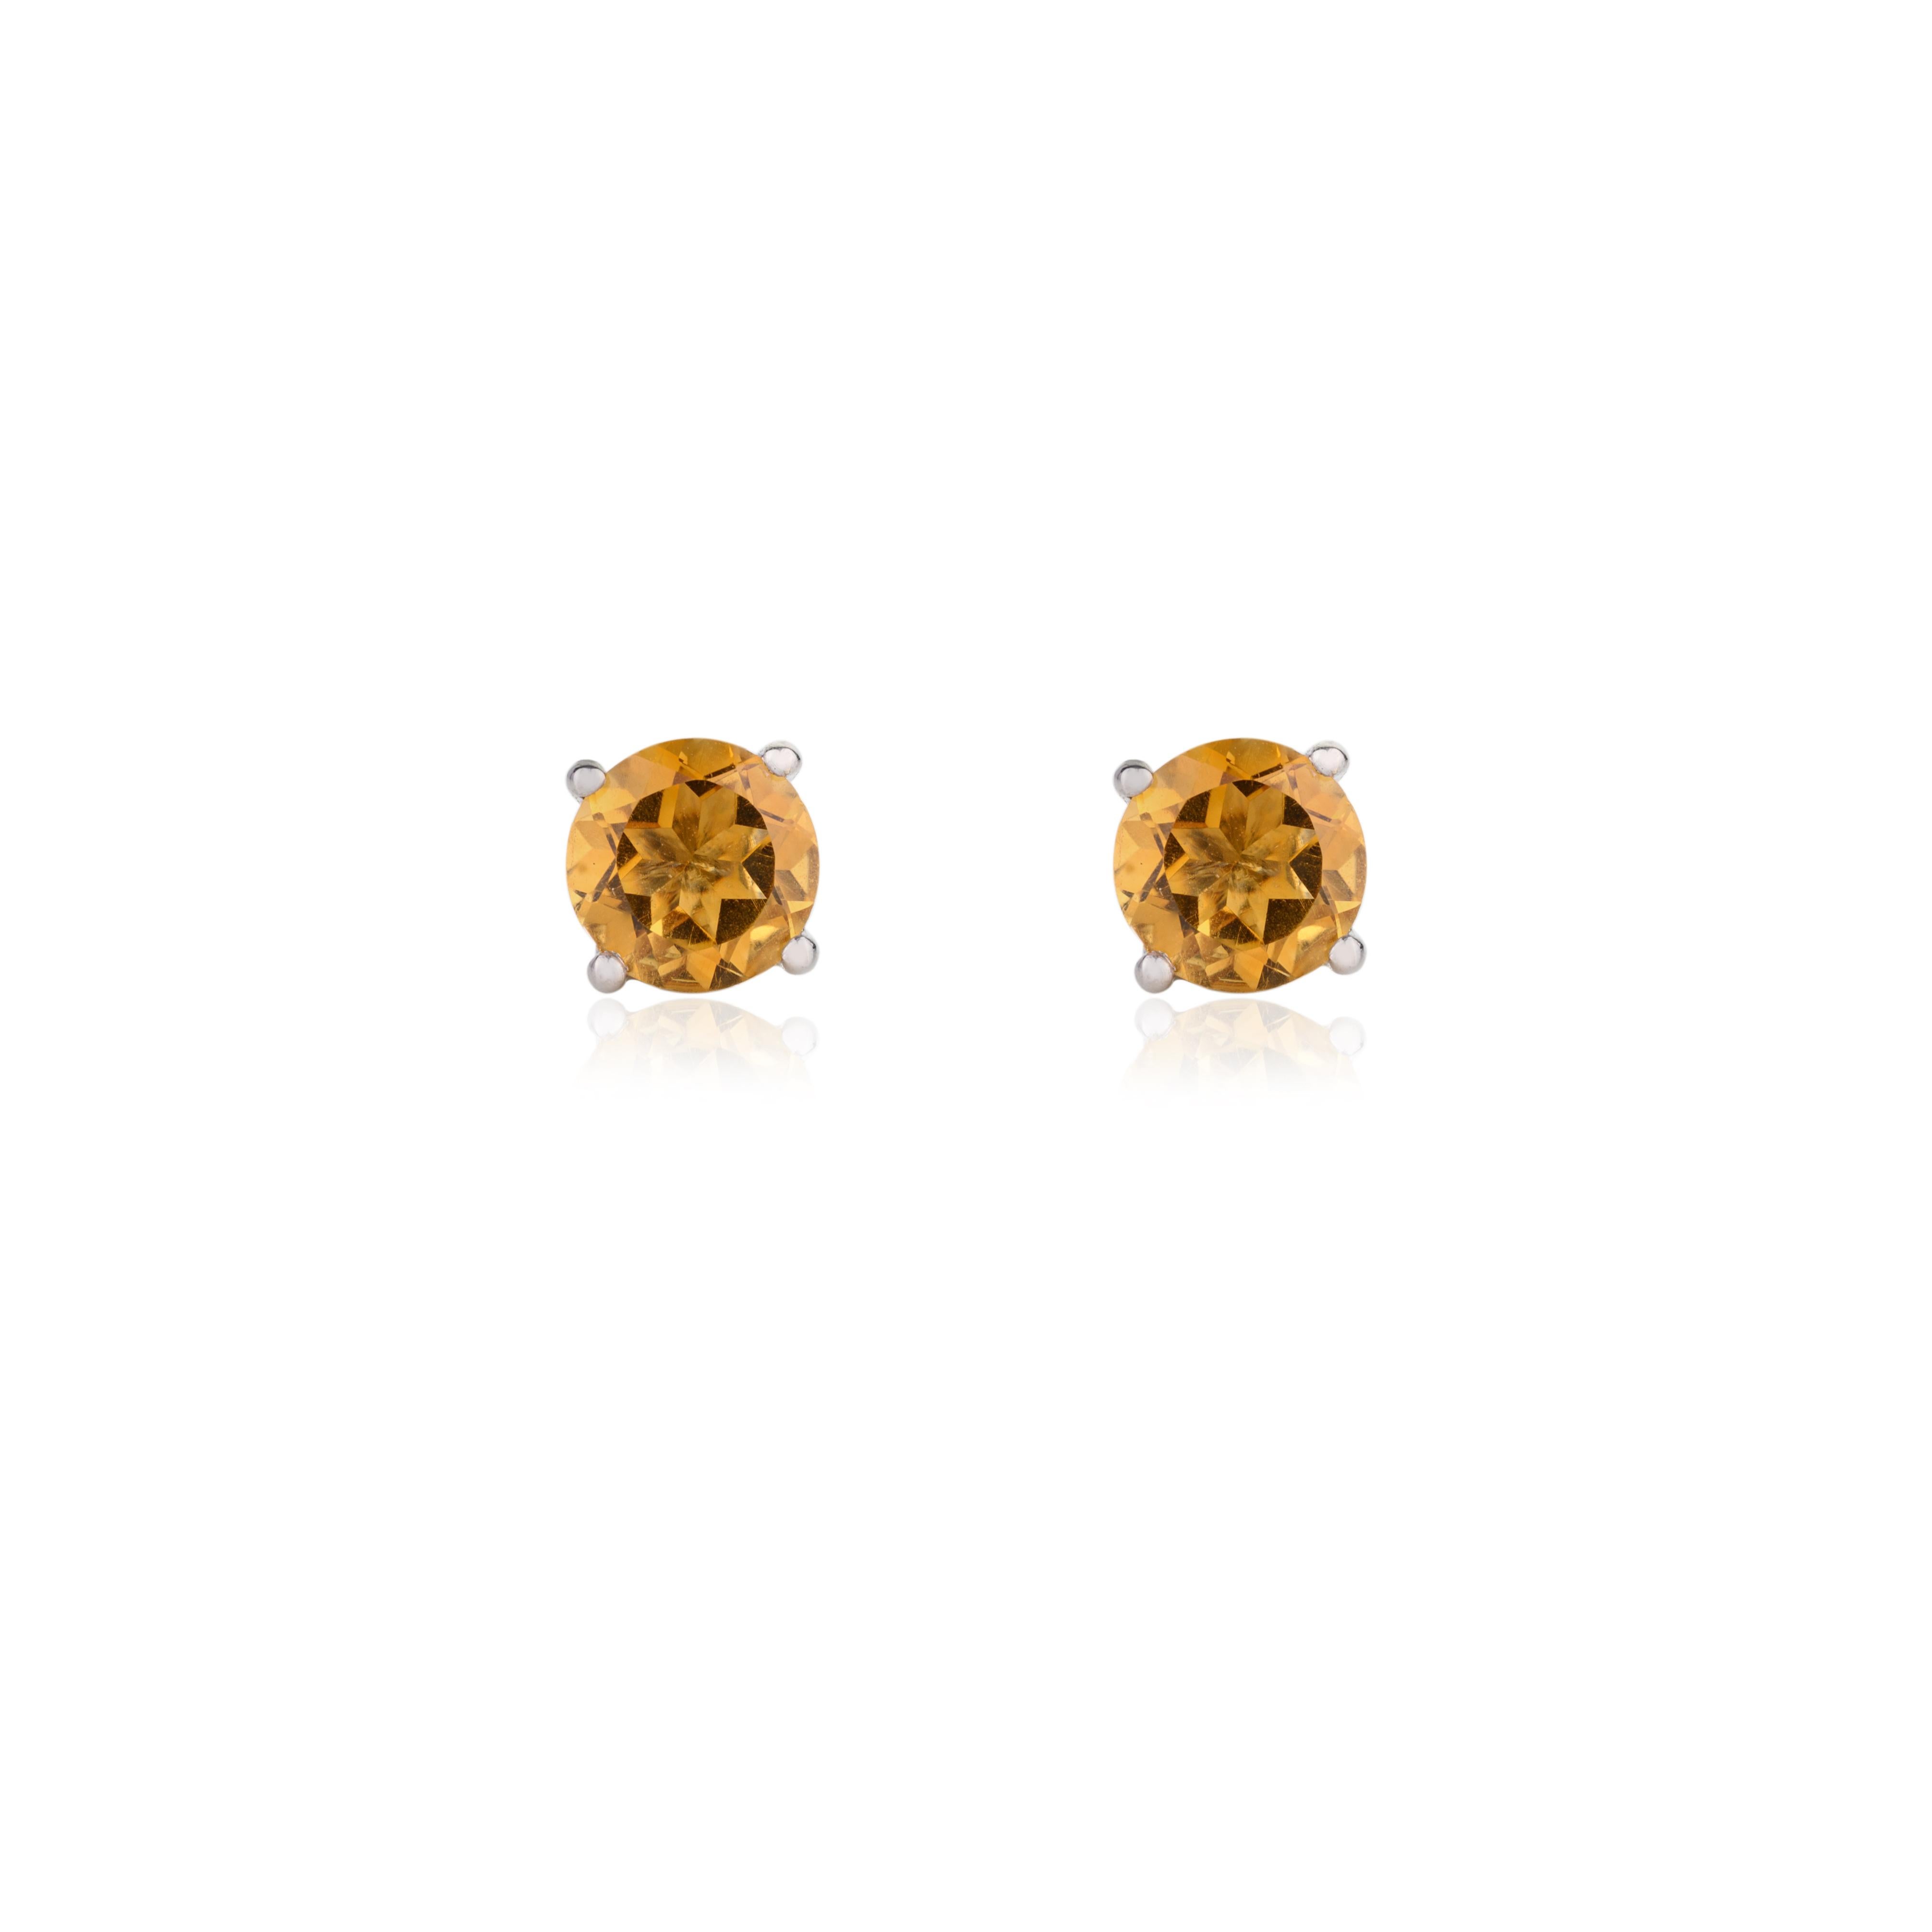 Faceted Citrine Solitaire Stud Earrings in 14k White Gold Gift for Her In New Condition For Sale In Houston, TX